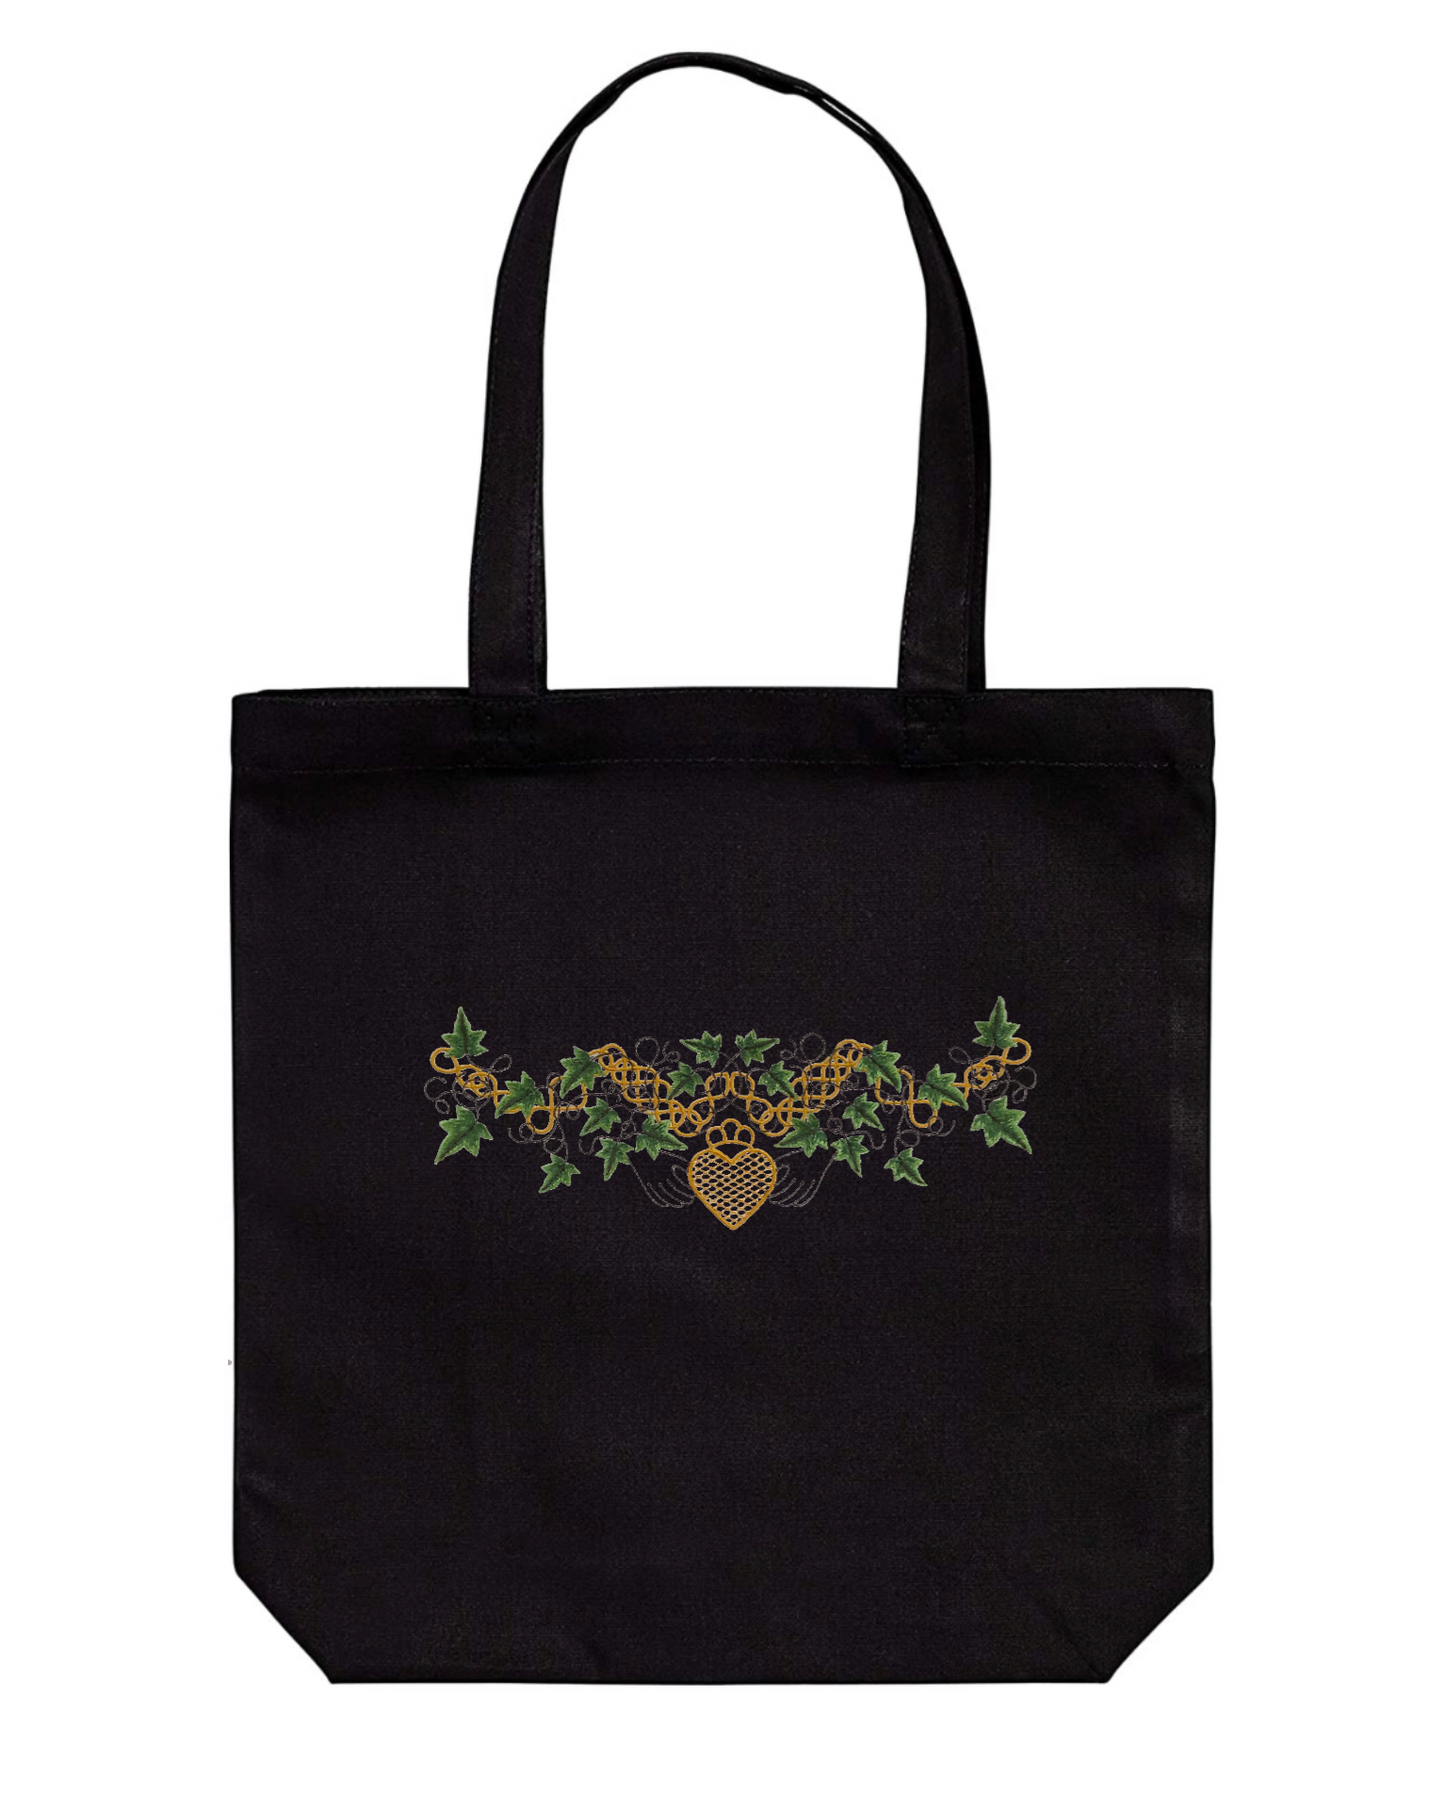 Claddagh Embroidered Cotton Canvas Market Bag. Choice of 5 different bags